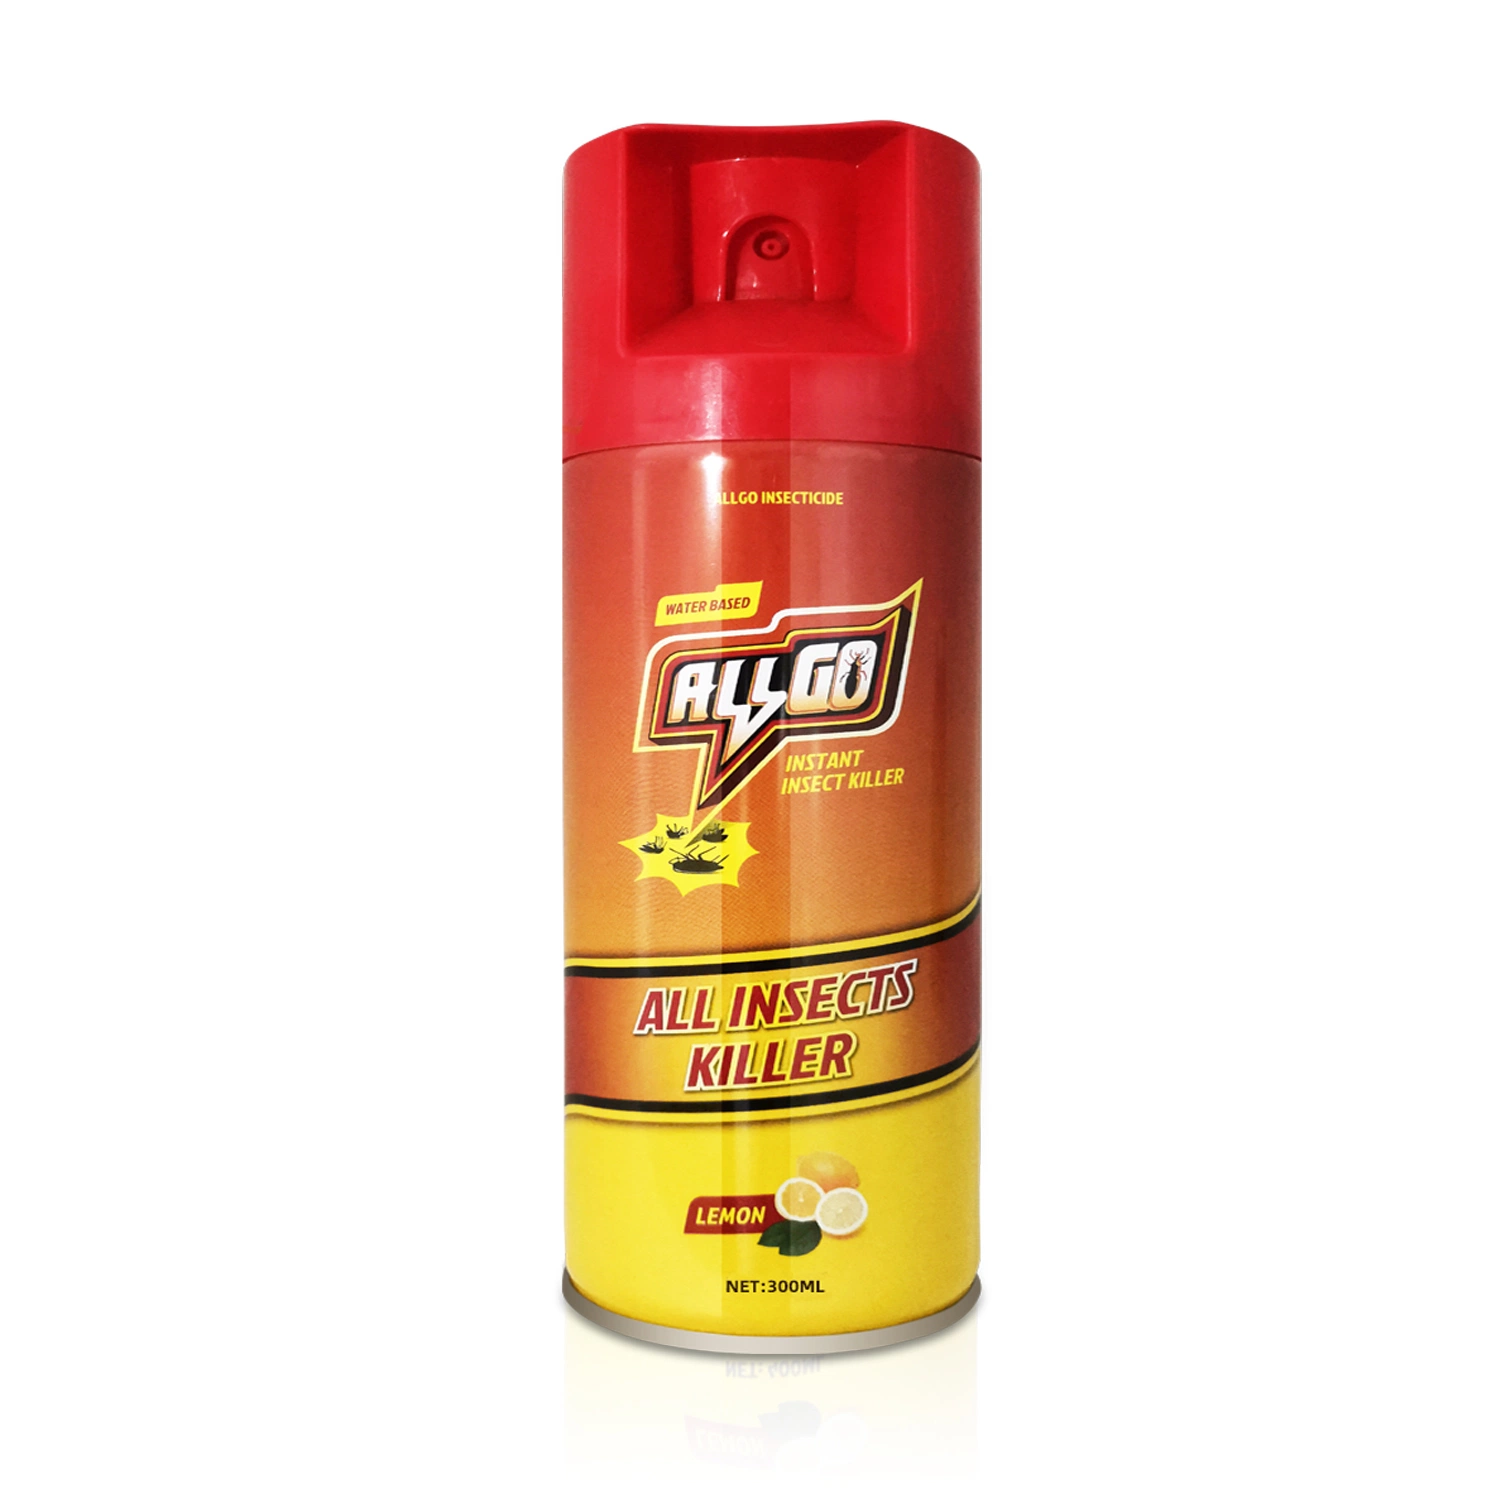 Allgo Best Sellers Mosquito Fly Cockroach Water Based Insecticide Spray Insect Killer